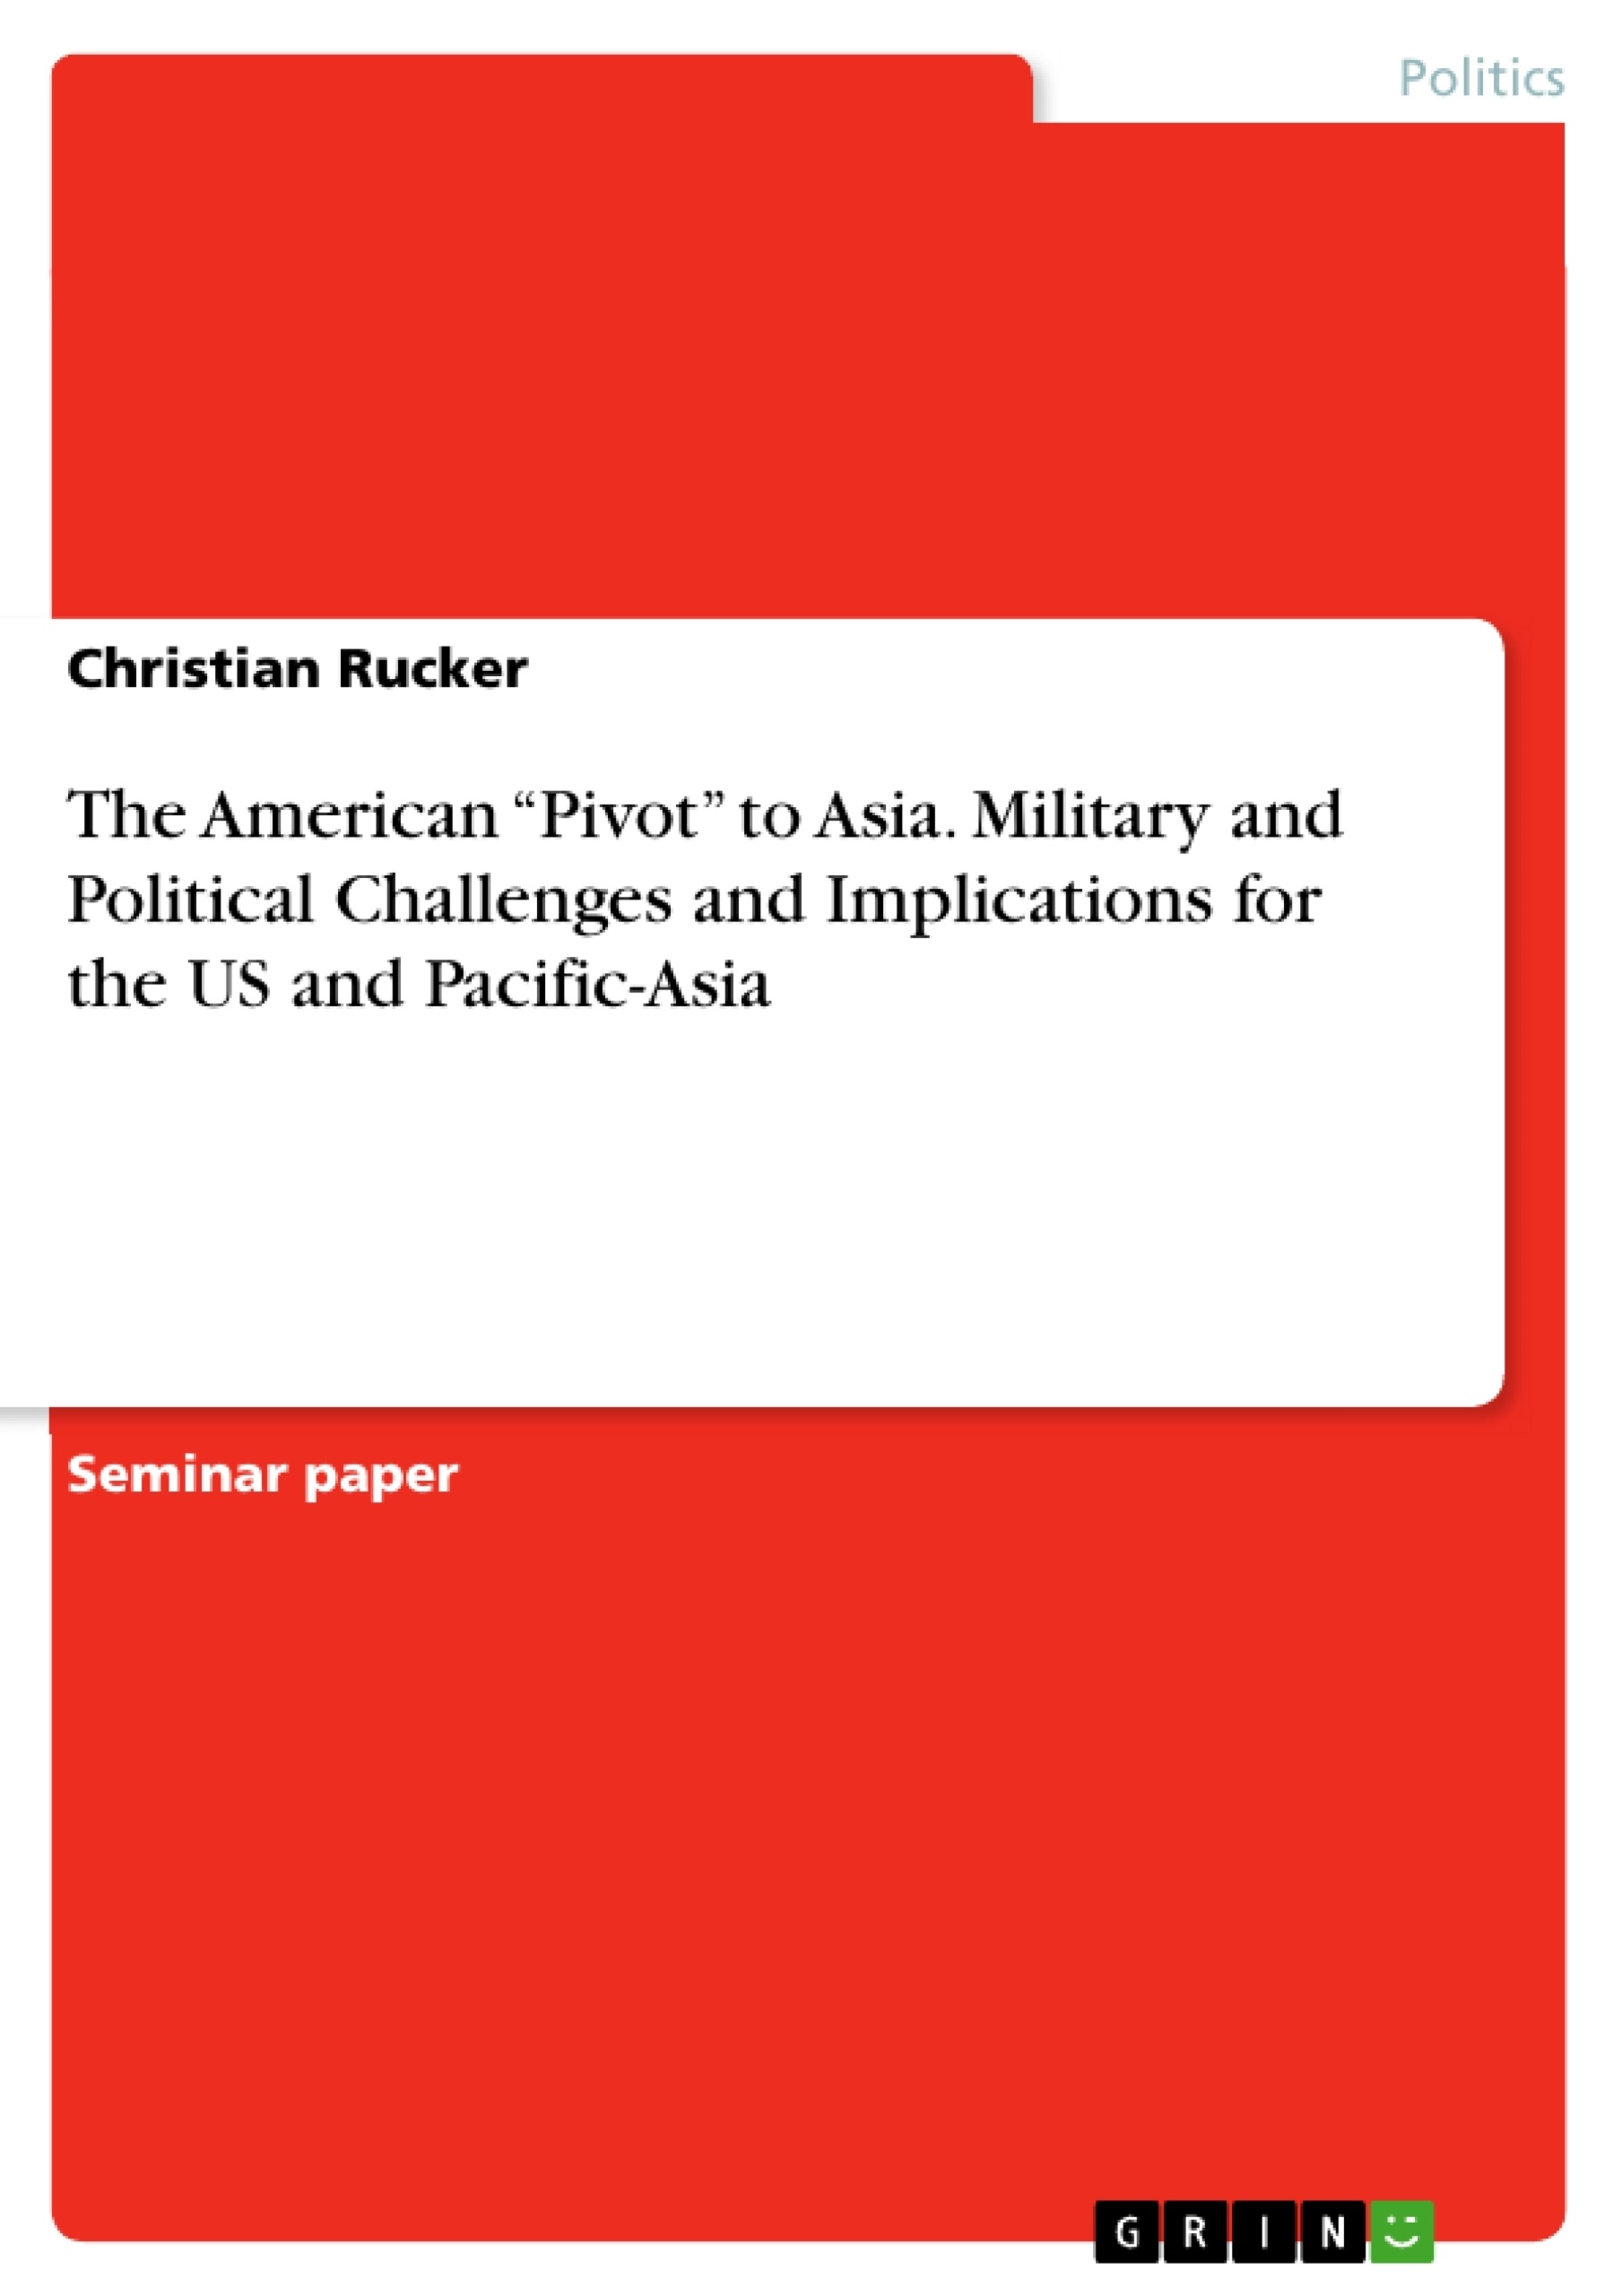 Title: The American “Pivot” to Asia. Military and Political Challenges and Implications for the US and Pacific-Asia